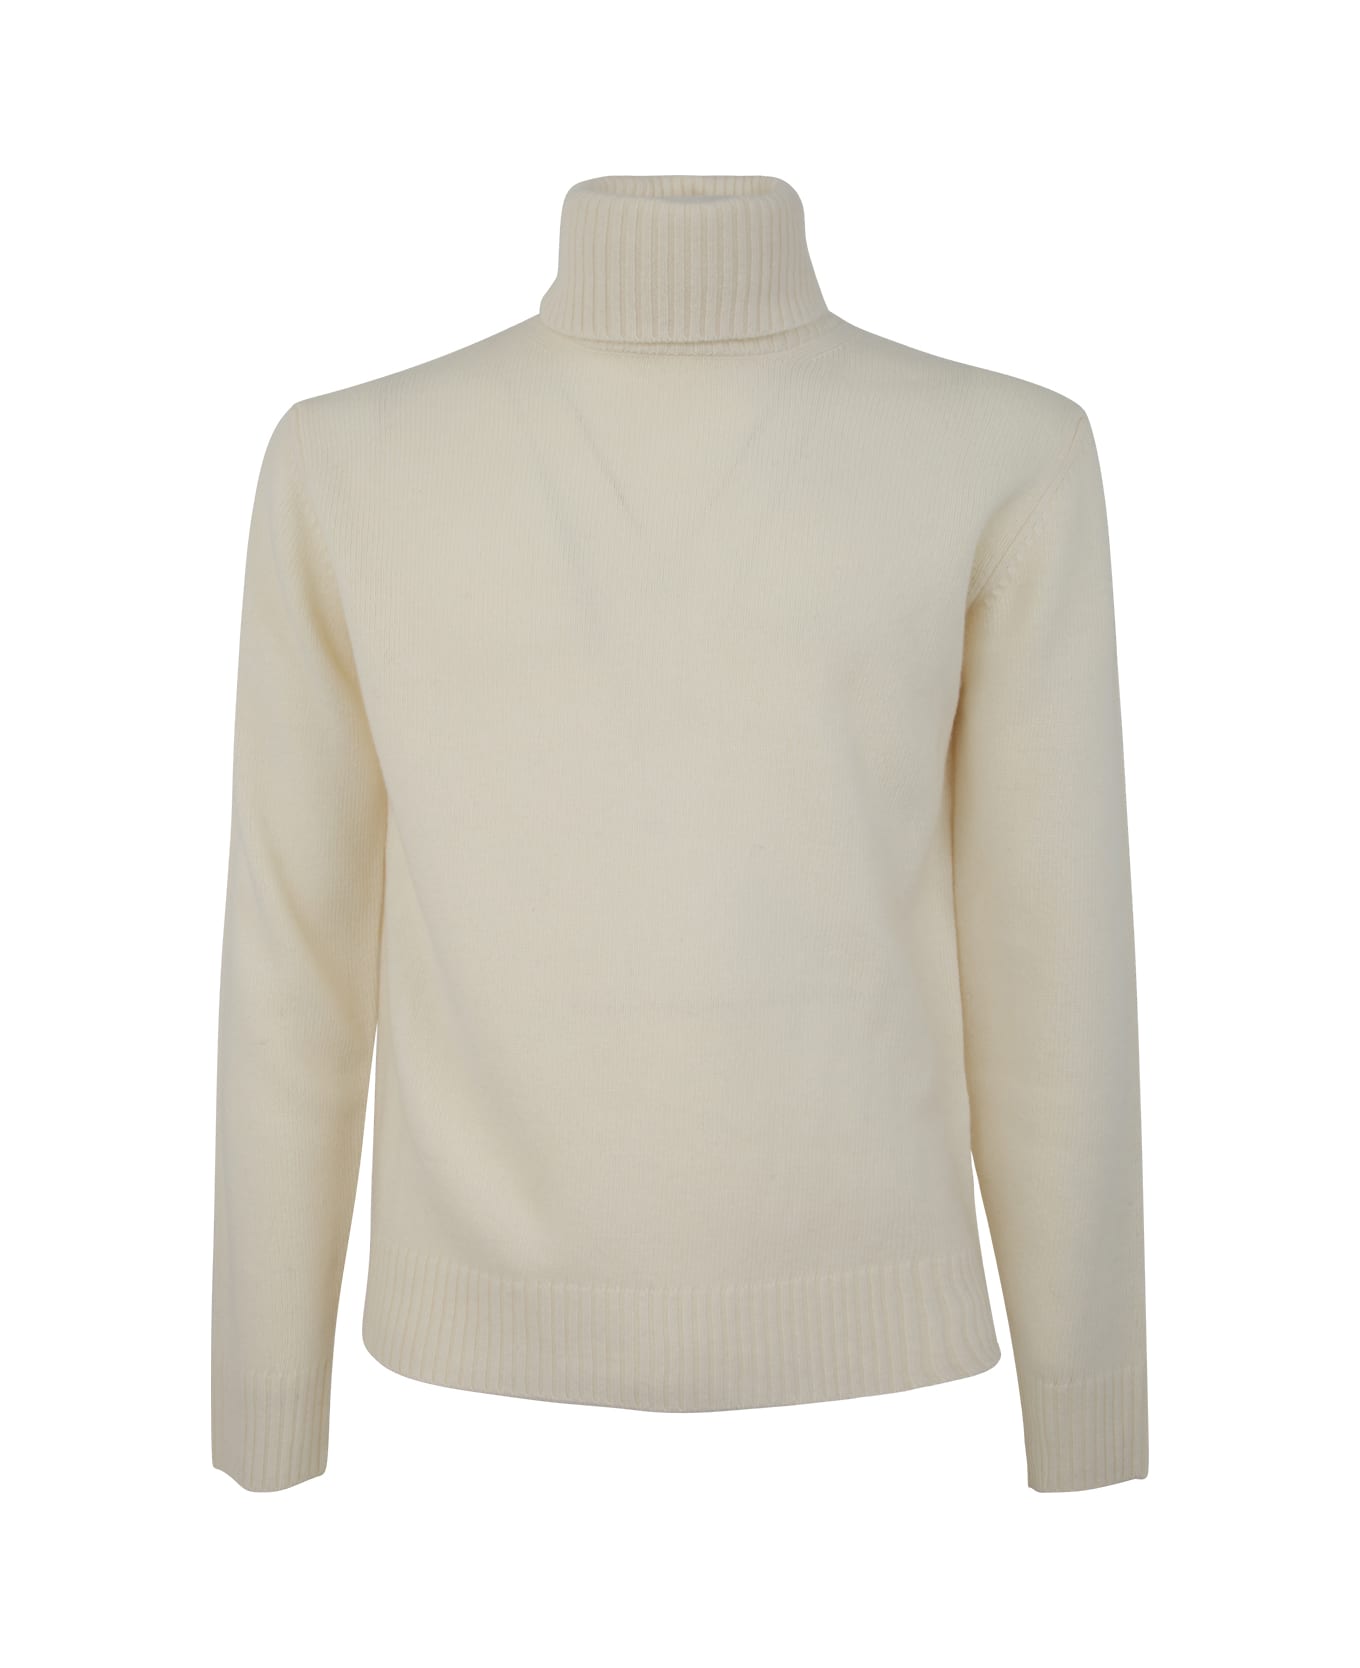 Nuur Long Sleeves Turtle Neck Sweater - White